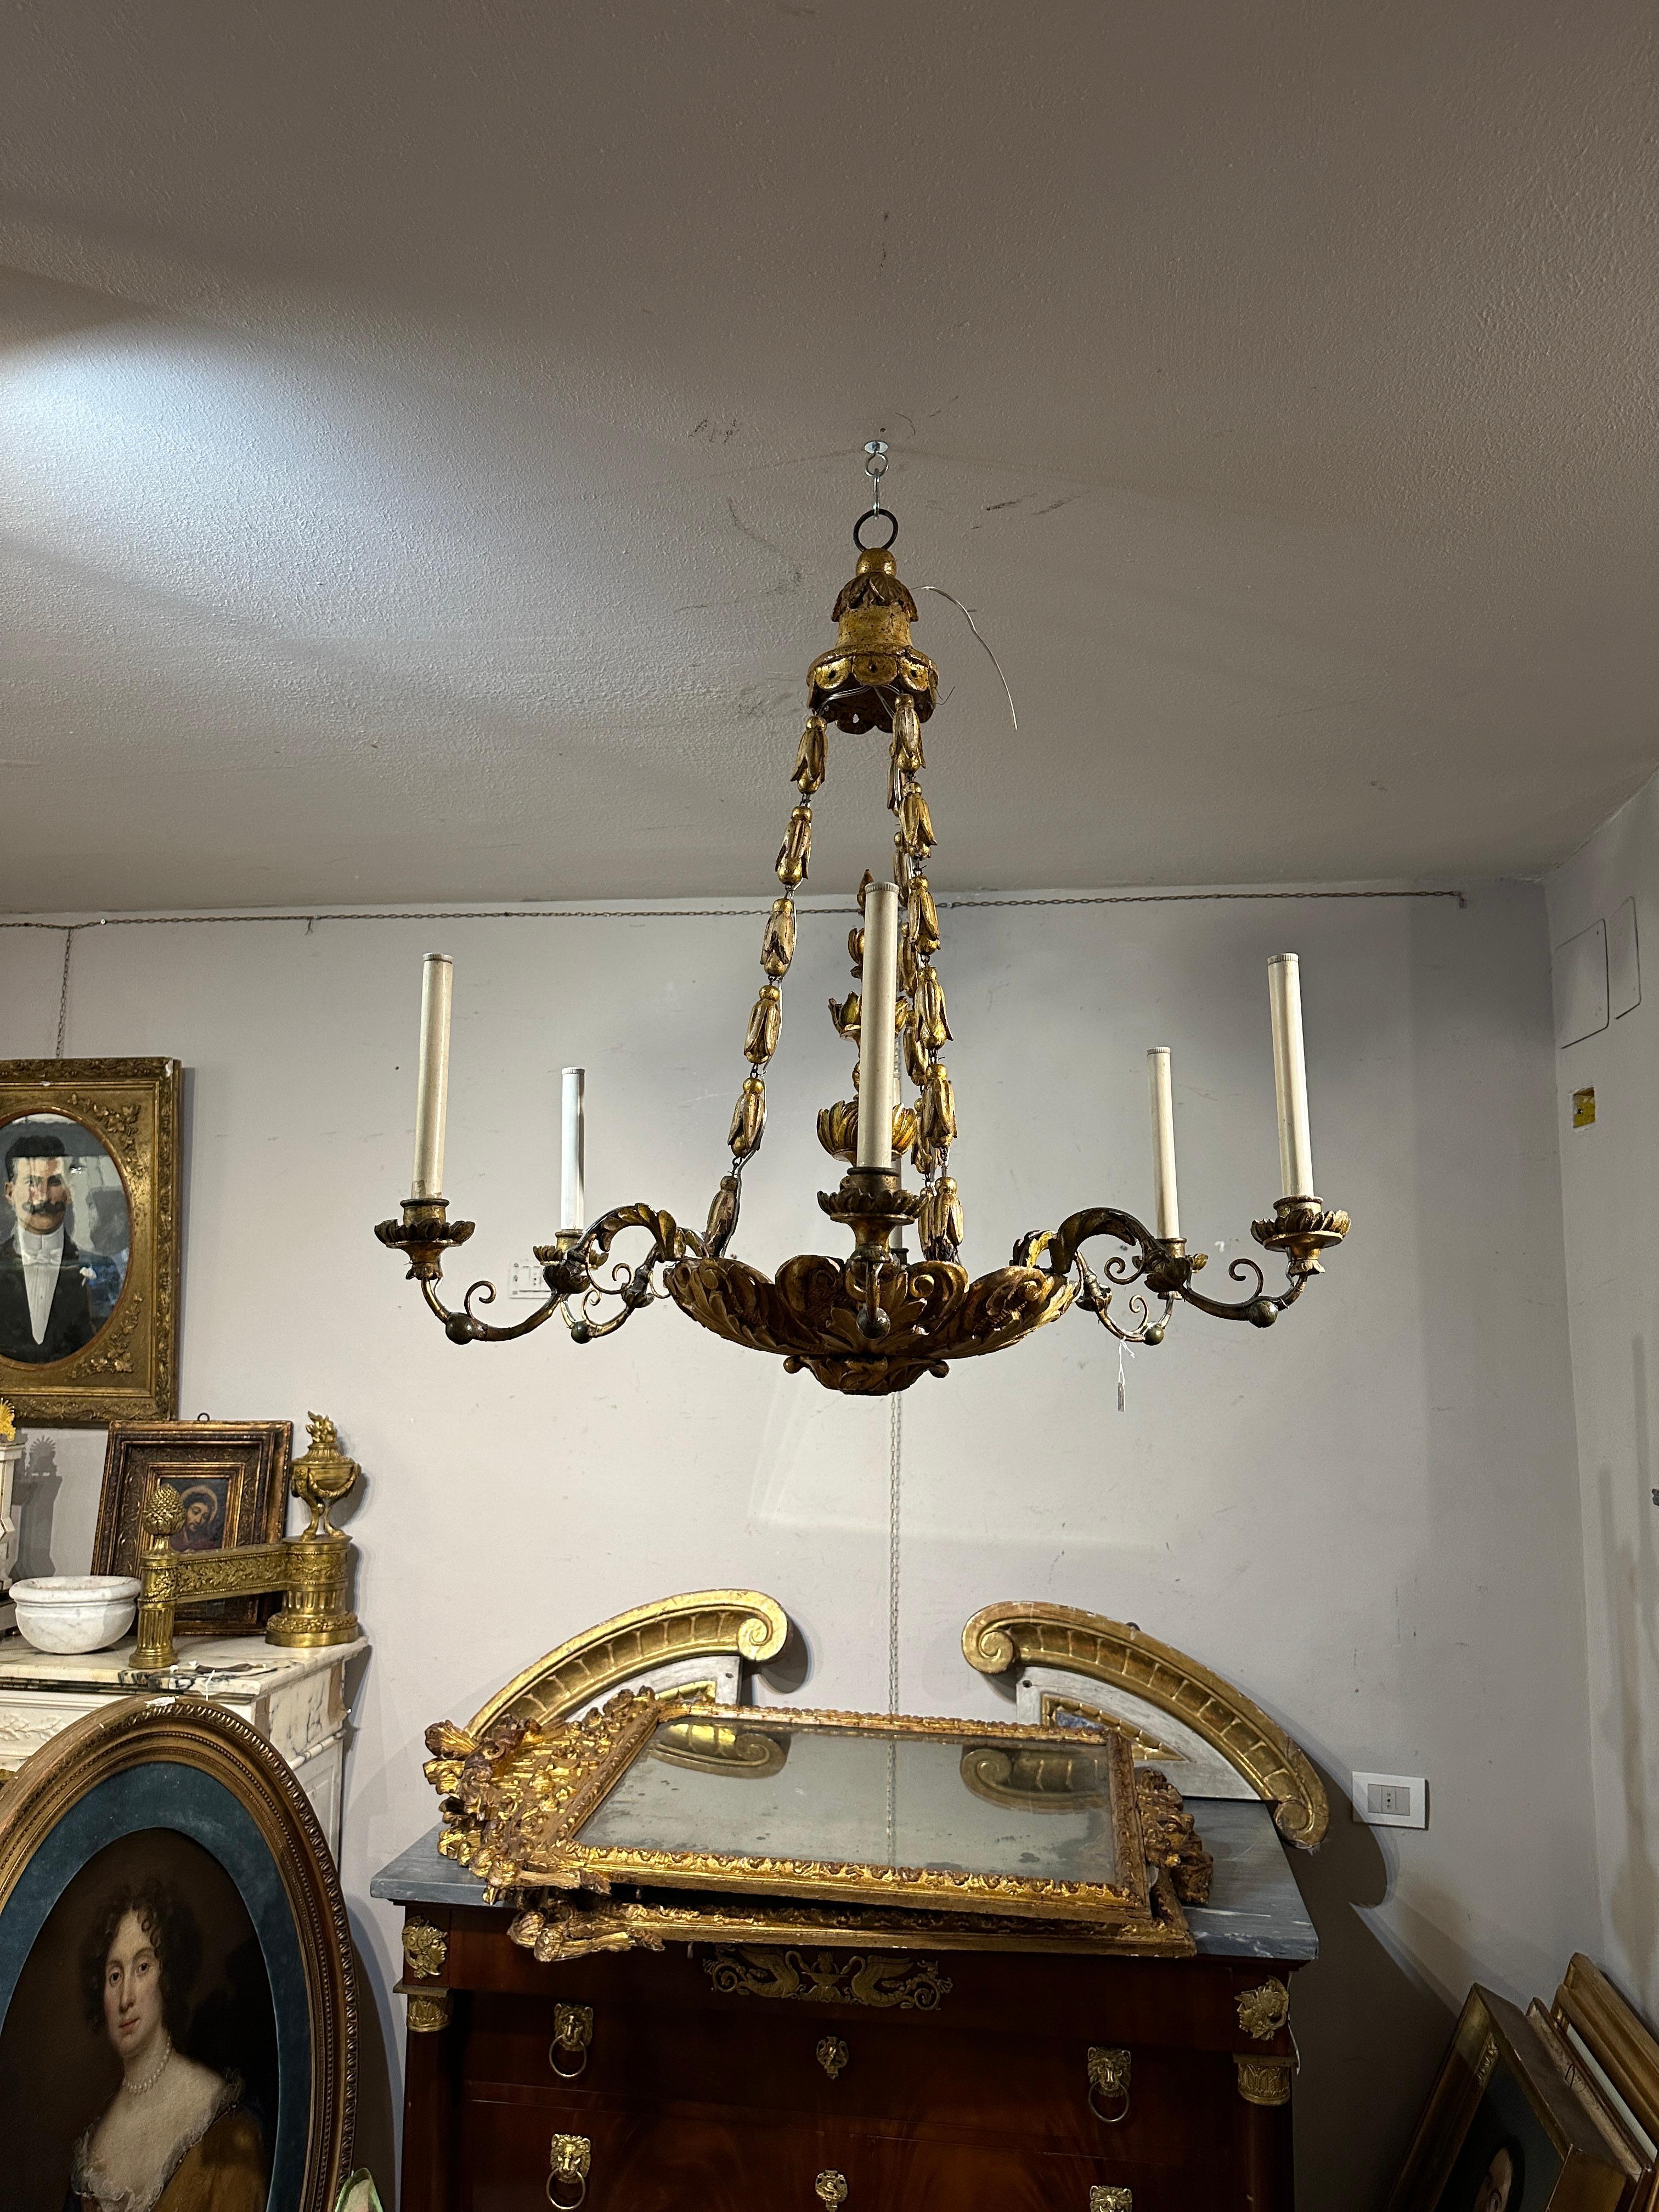 The carved wooden chandelier, produced in late 18th century Vienna, is an excellent representation of the craftsmanship of that era. Its umbrella shape, decorated with floral carvings, gives it a classic elegance, while the pure gold gilding adds a